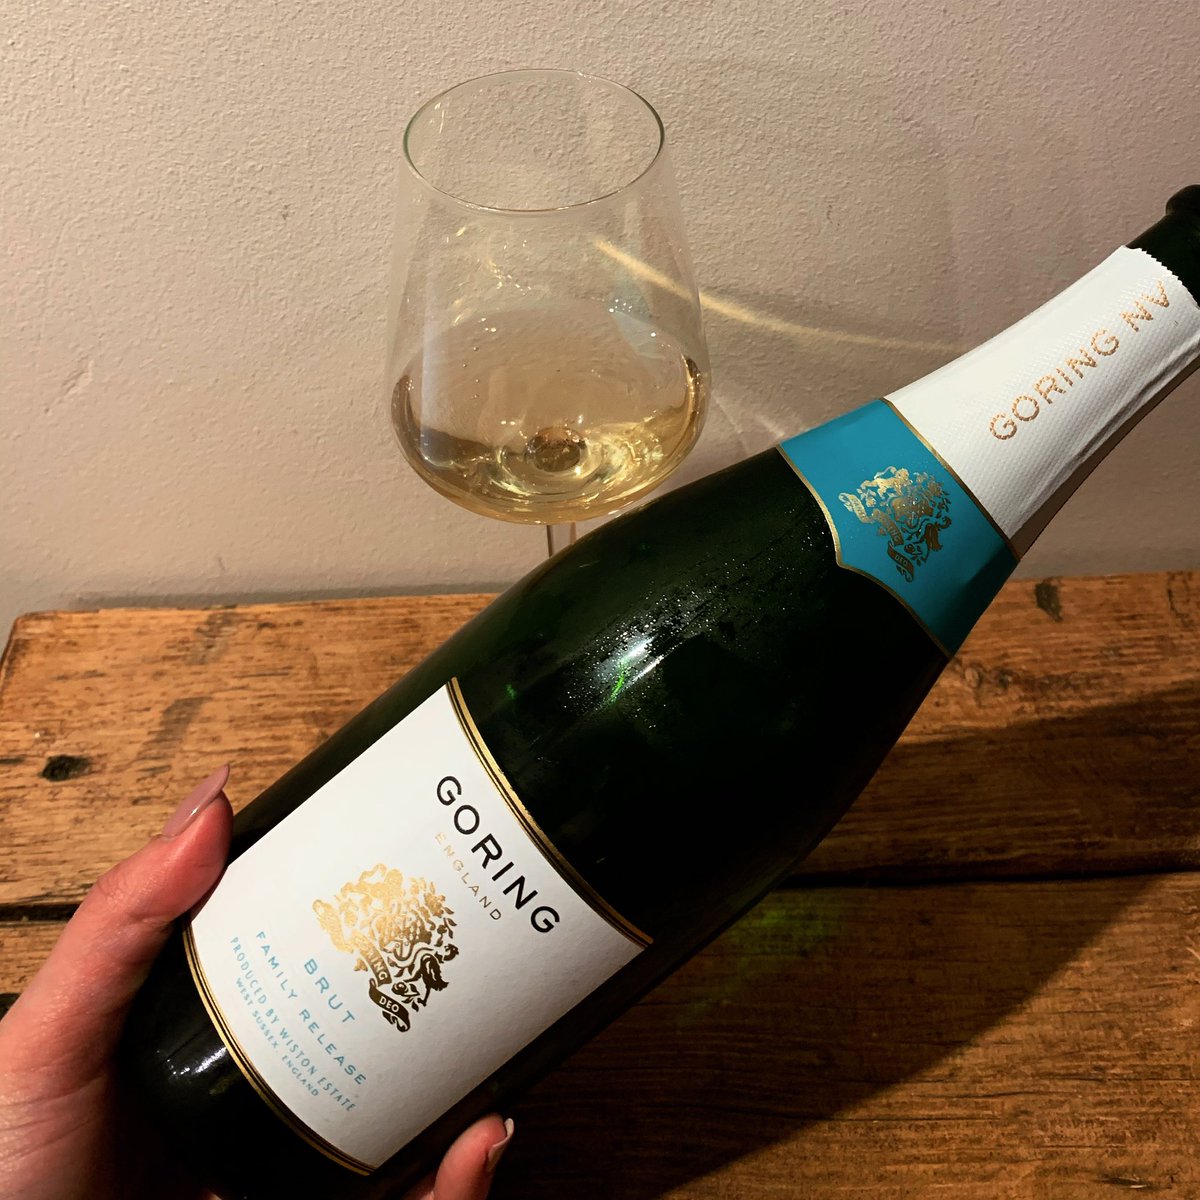 What better way to spend a Tuesday than with some English Sparkling Wine 🍾This Wiston Estate Goring Brut Family Reserve is a fantastically complex wine! #wine #englishwine #englishsparklingwine #wineblog #winelover